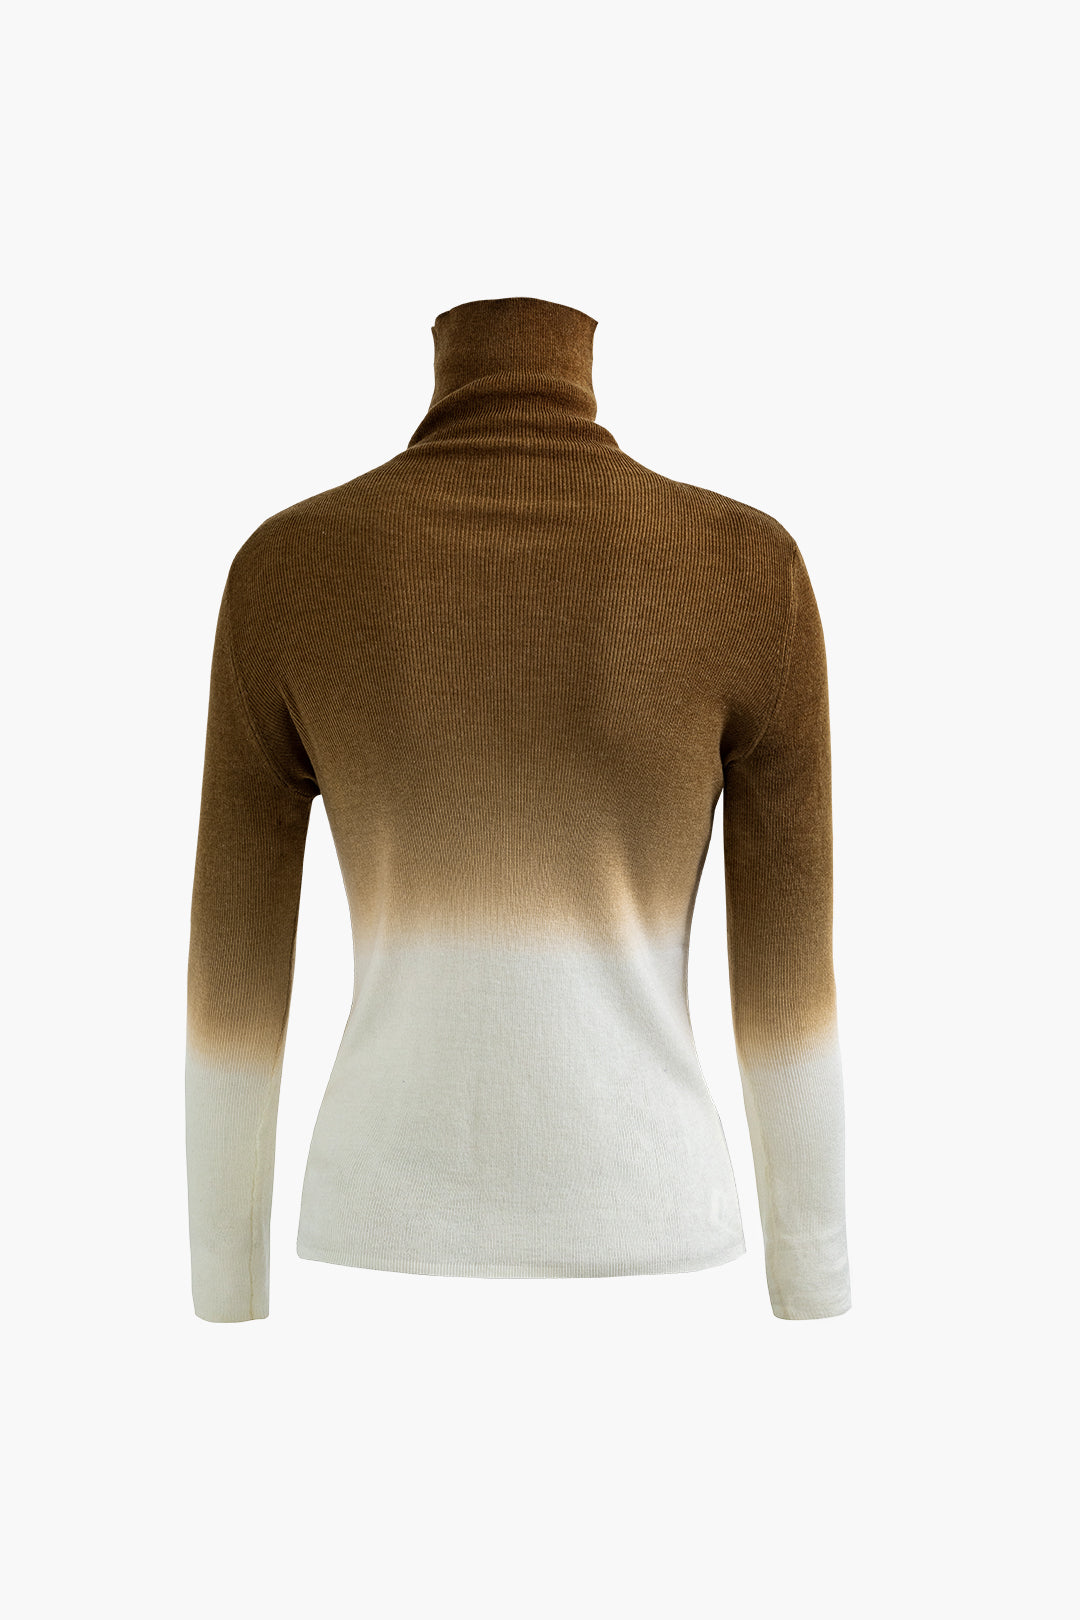 Ombre Turtle Neck Rib Knit Long Sleeve Top